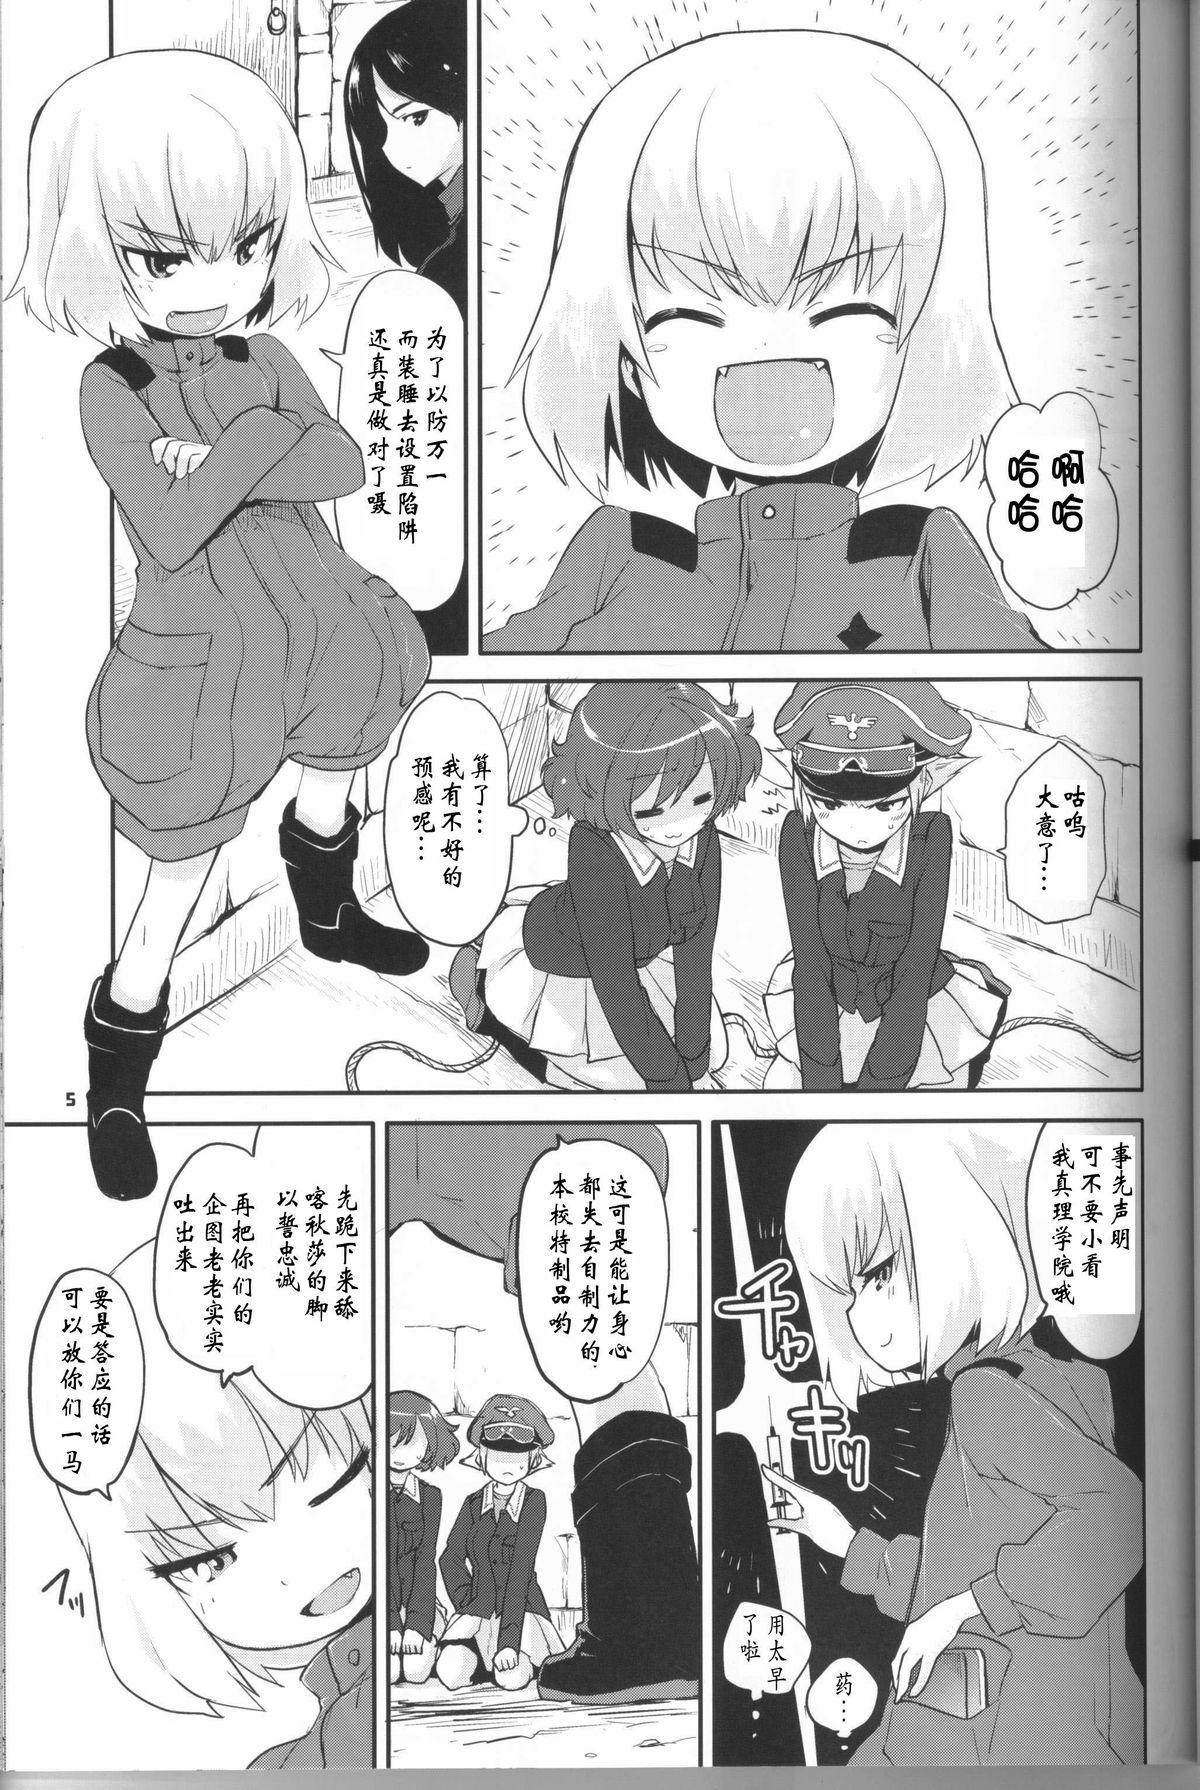 Pay The General Frost Has Come! - Girls und panzer Indo - Page 4